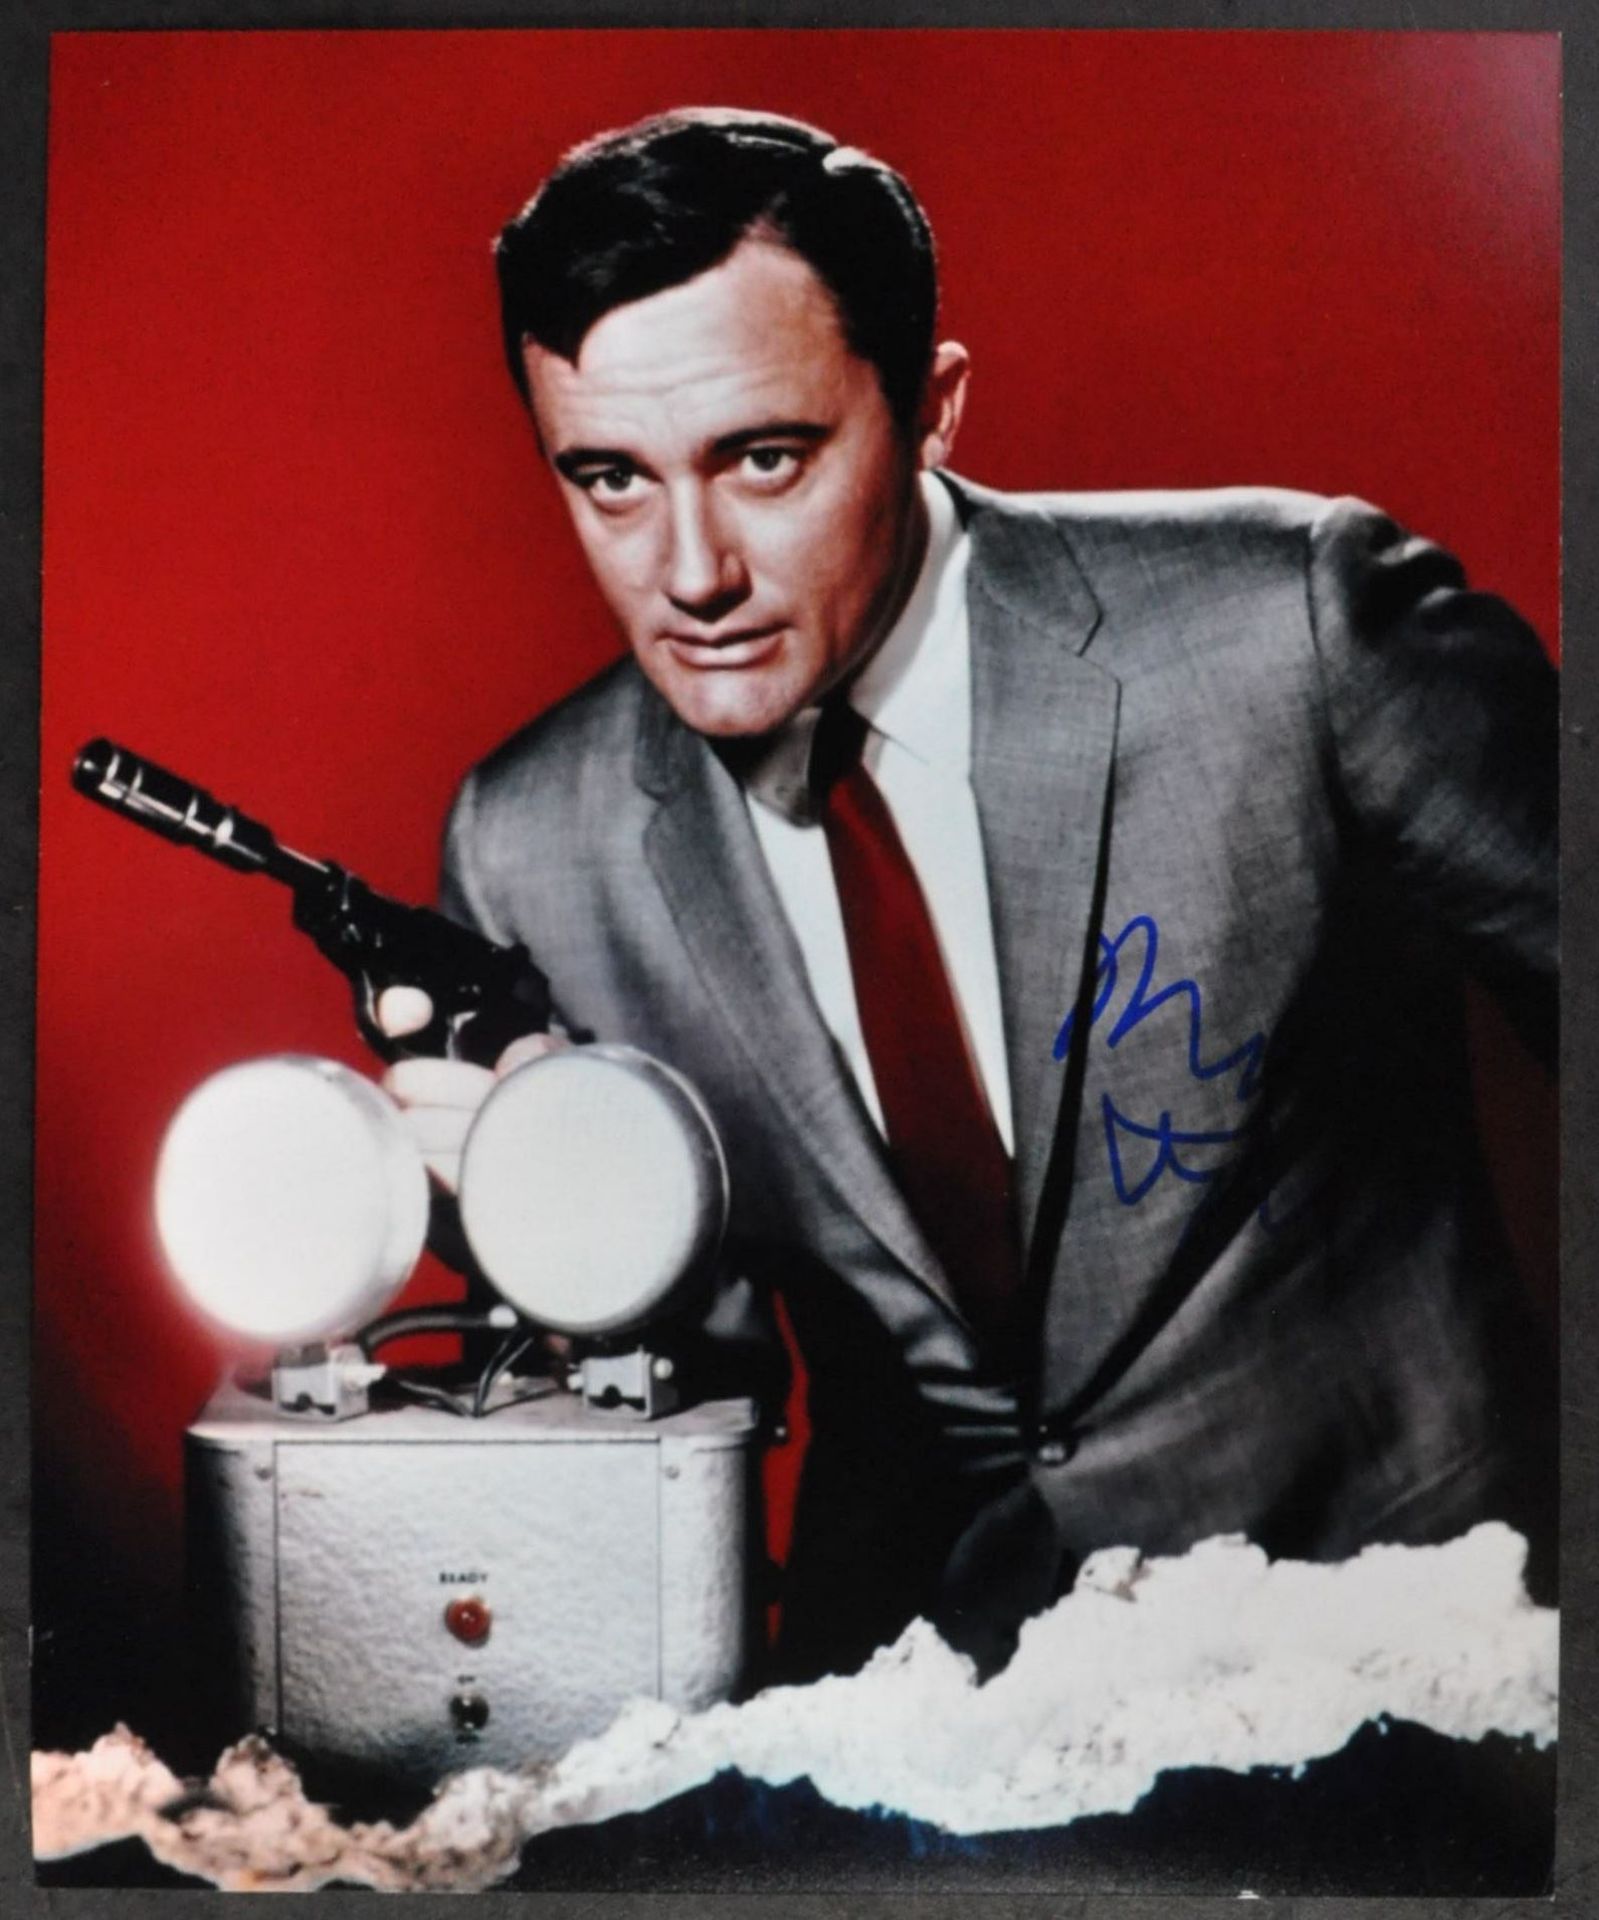 ROBERT VAUGHN - MAN FROM UNCLE - SIGNED PHOTO - AFTAL